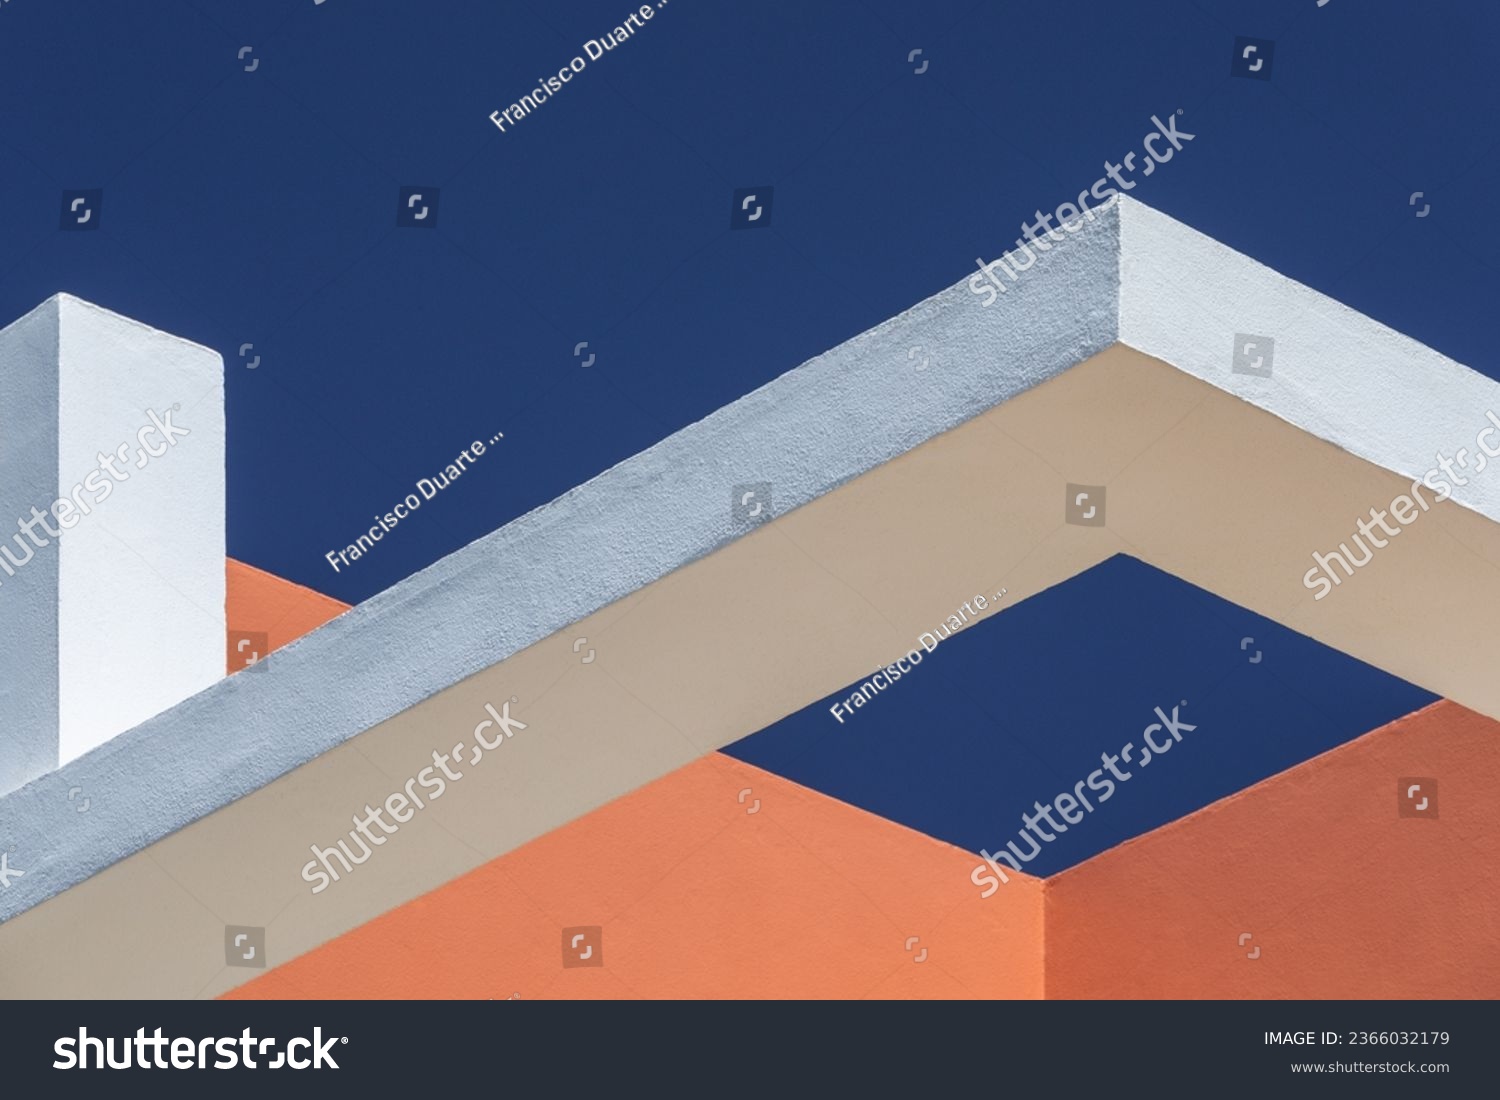 Abstract geometric shapes architecture background. Modern concrete walls and beams, detail fragment shapes. Empty structure, angles, volumes, composition, lines. Architectural, contemporary, concept.  #2366032179